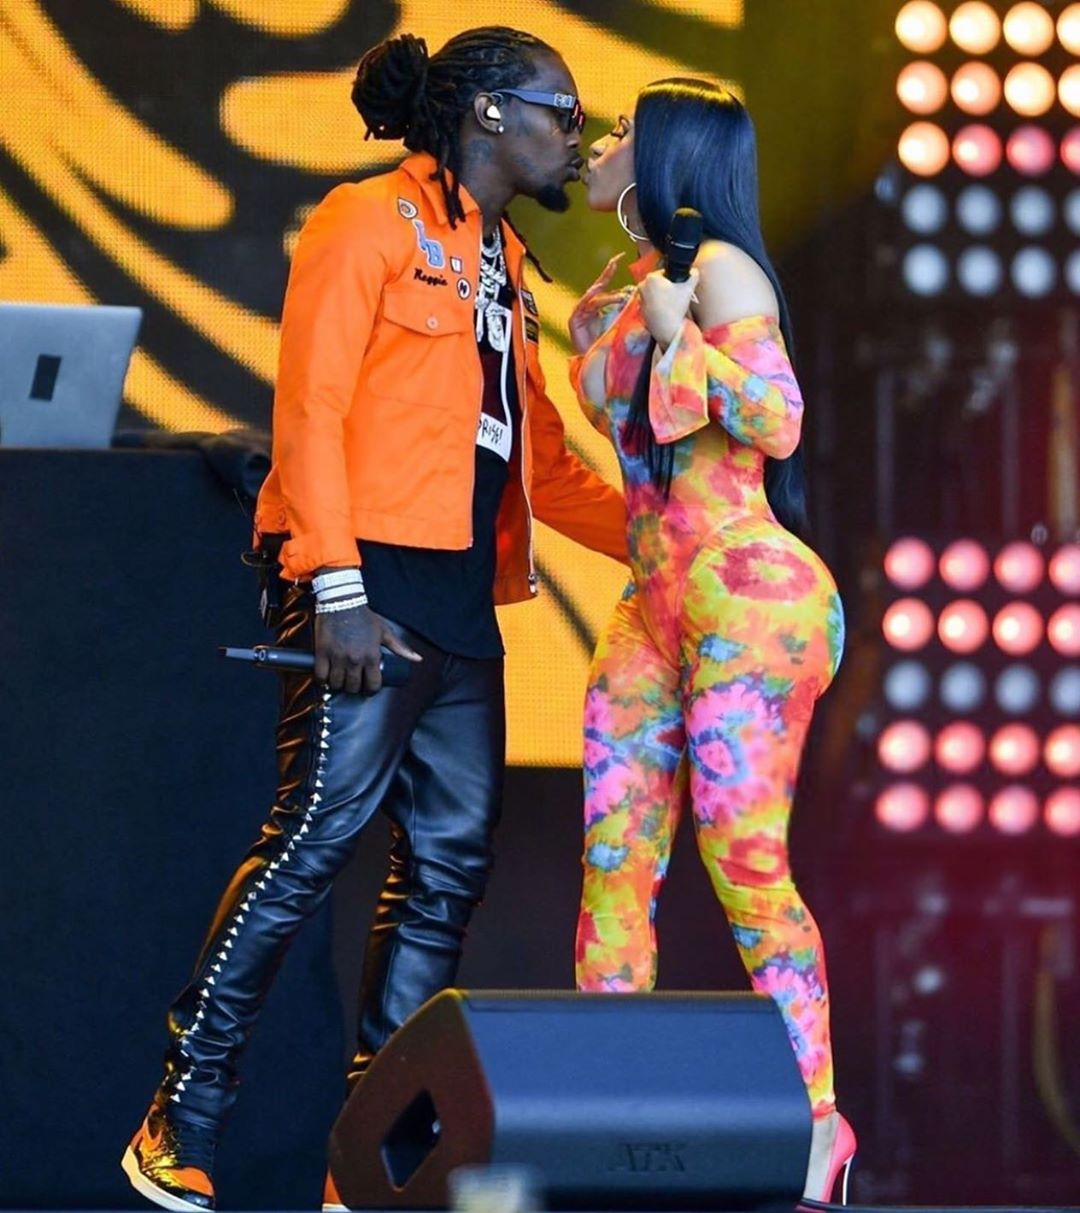 Recall in 2019, in a now-famous video, the rapper announced that she had ended her marriage to Offset. [Instagram/IamCardiB]